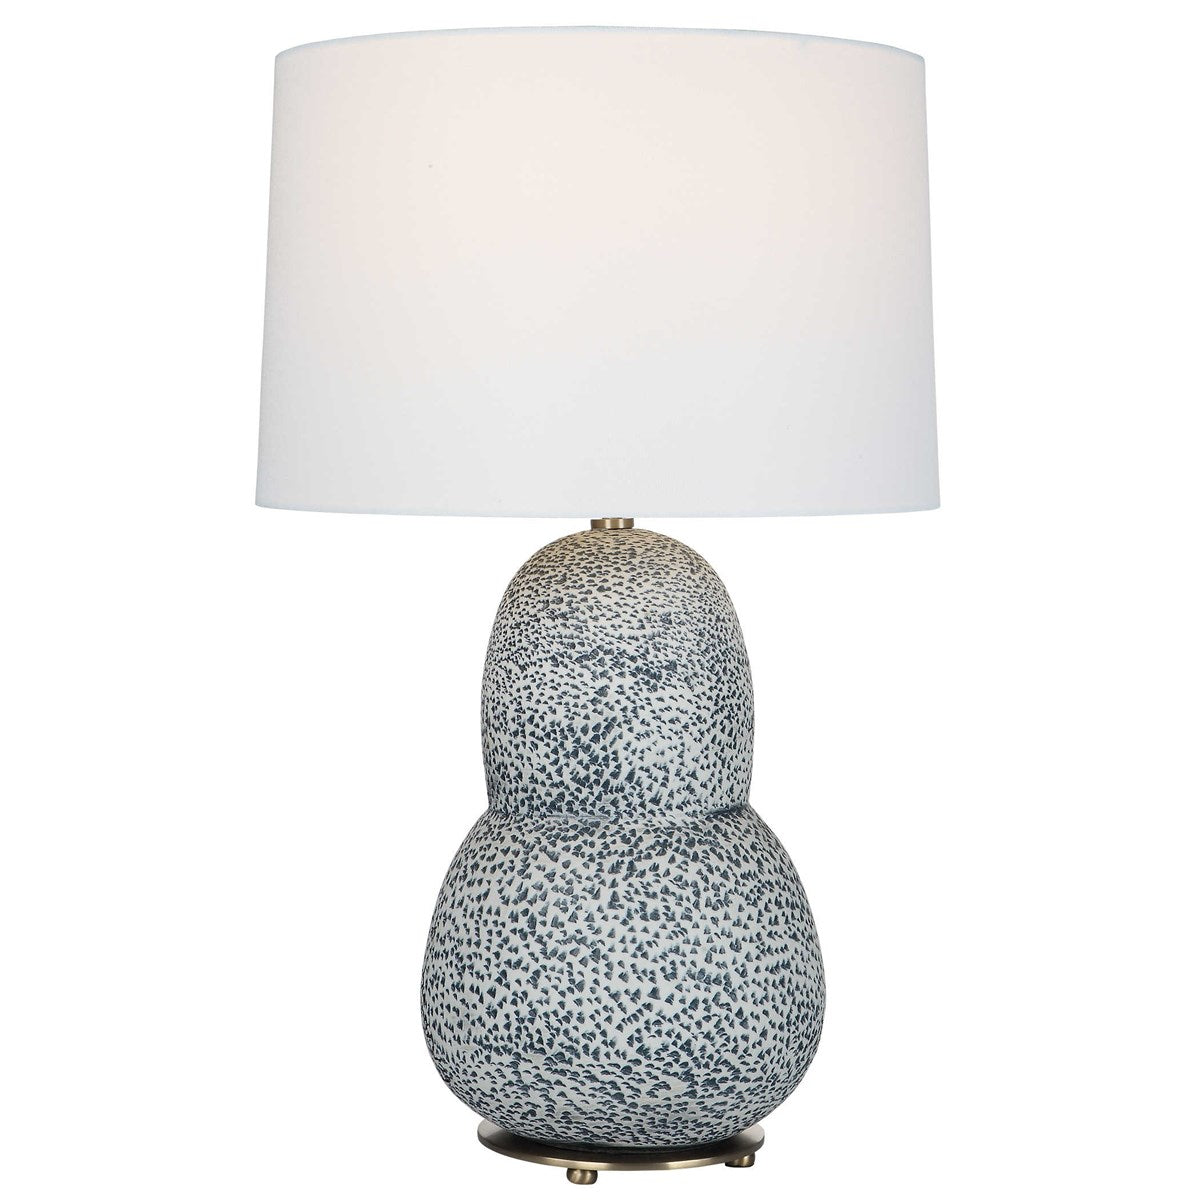 BLUE SPECKELED TABLE LAMP